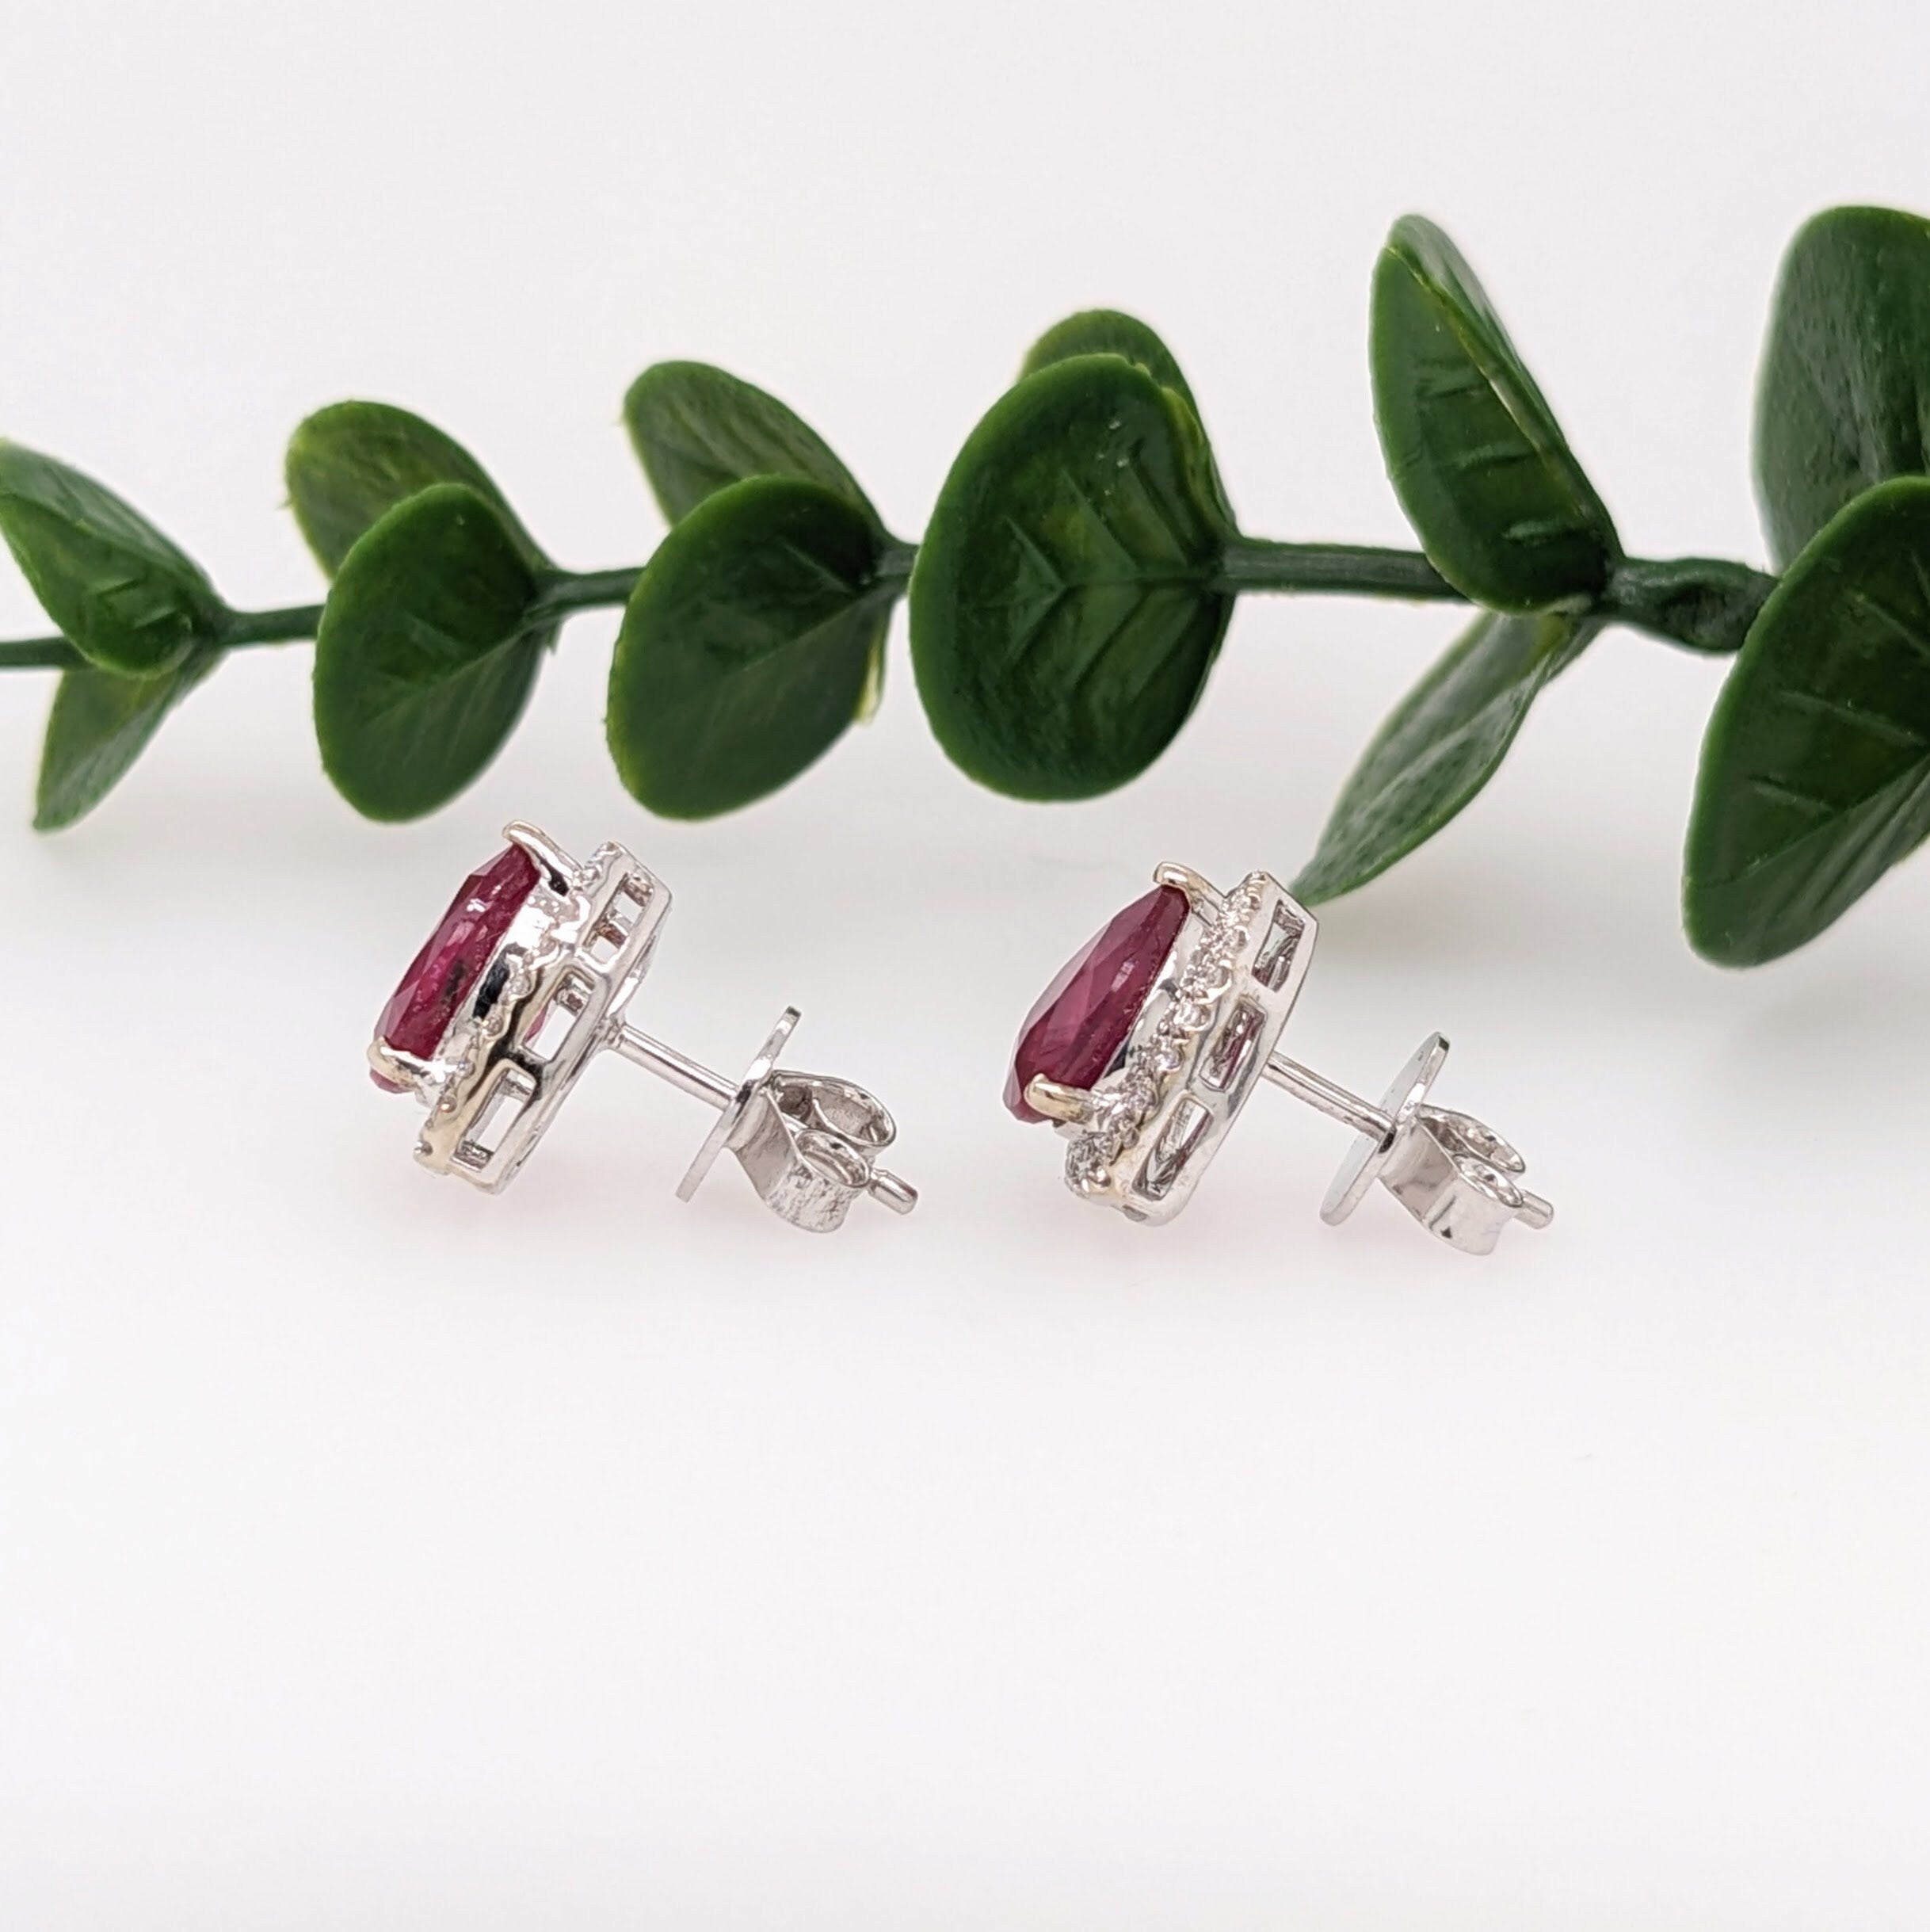 Stud Earrings-Pretty Madagascar Ruby Studs in Solid 14K White Gold w Natural Diamond Accents | Pear 9x7mm | Classic | Elegant | July Birthstone - NNJGemstones